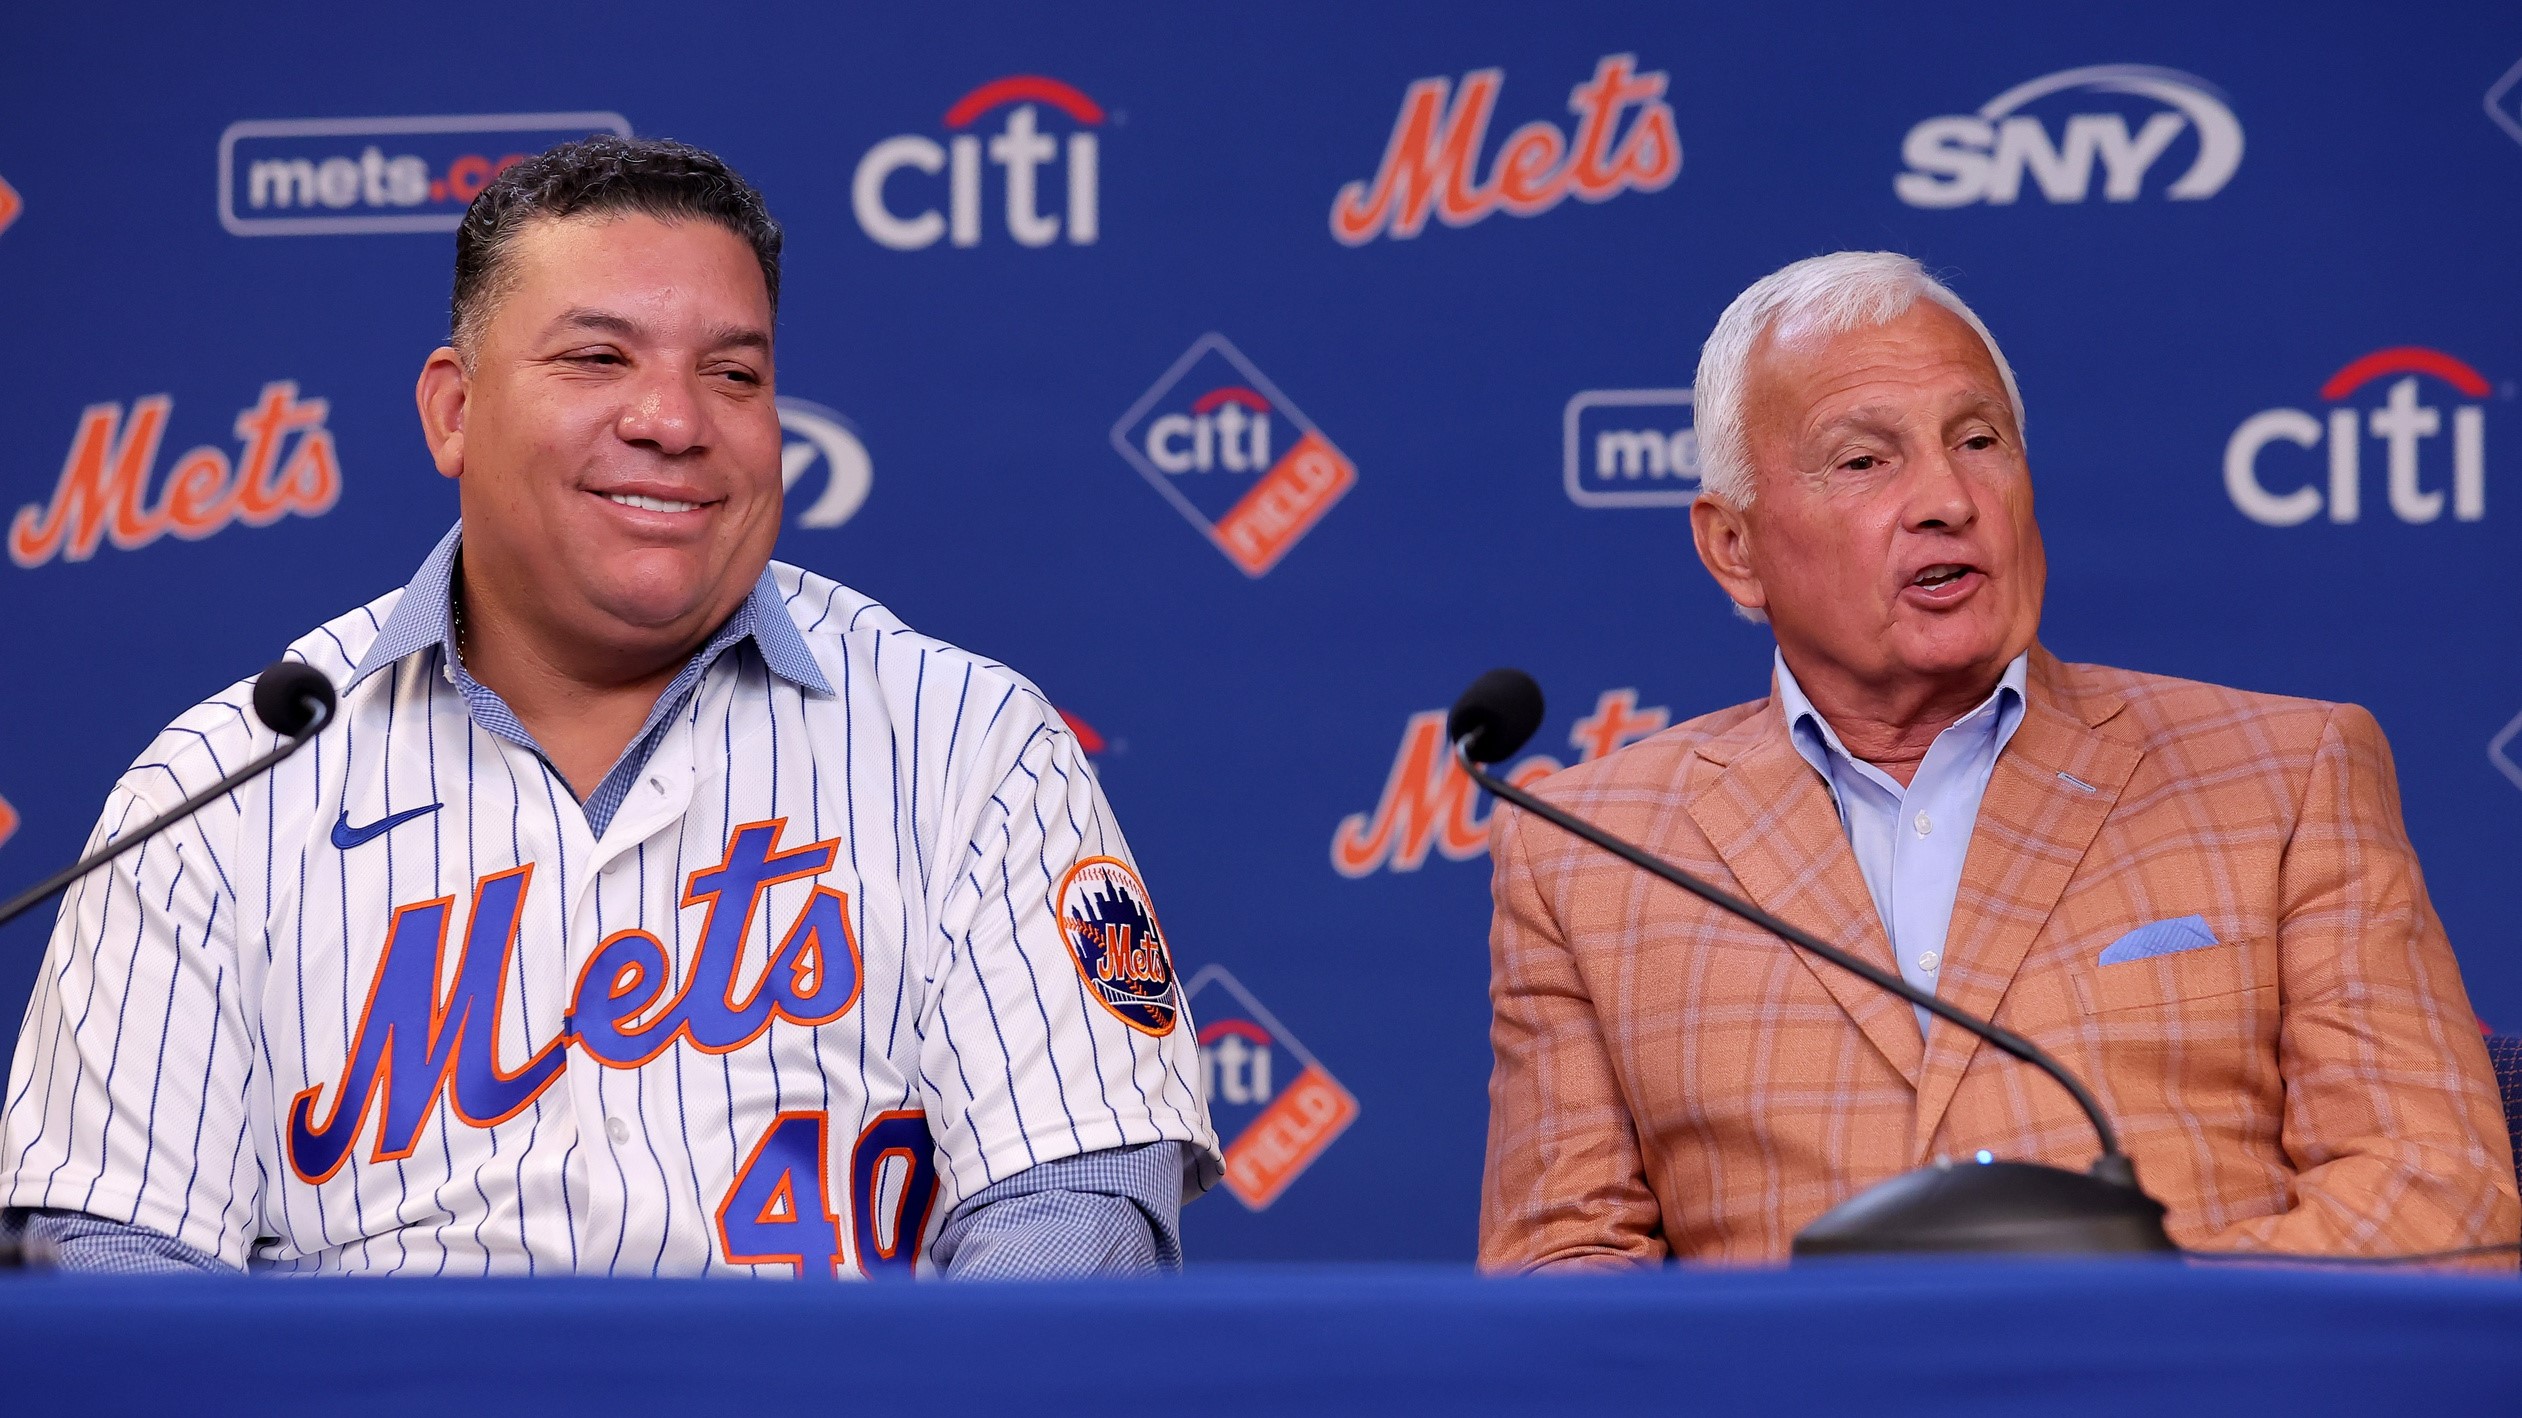 On Bartolo Colon Retirement Day, the former Met looks back on his tenure in  NY